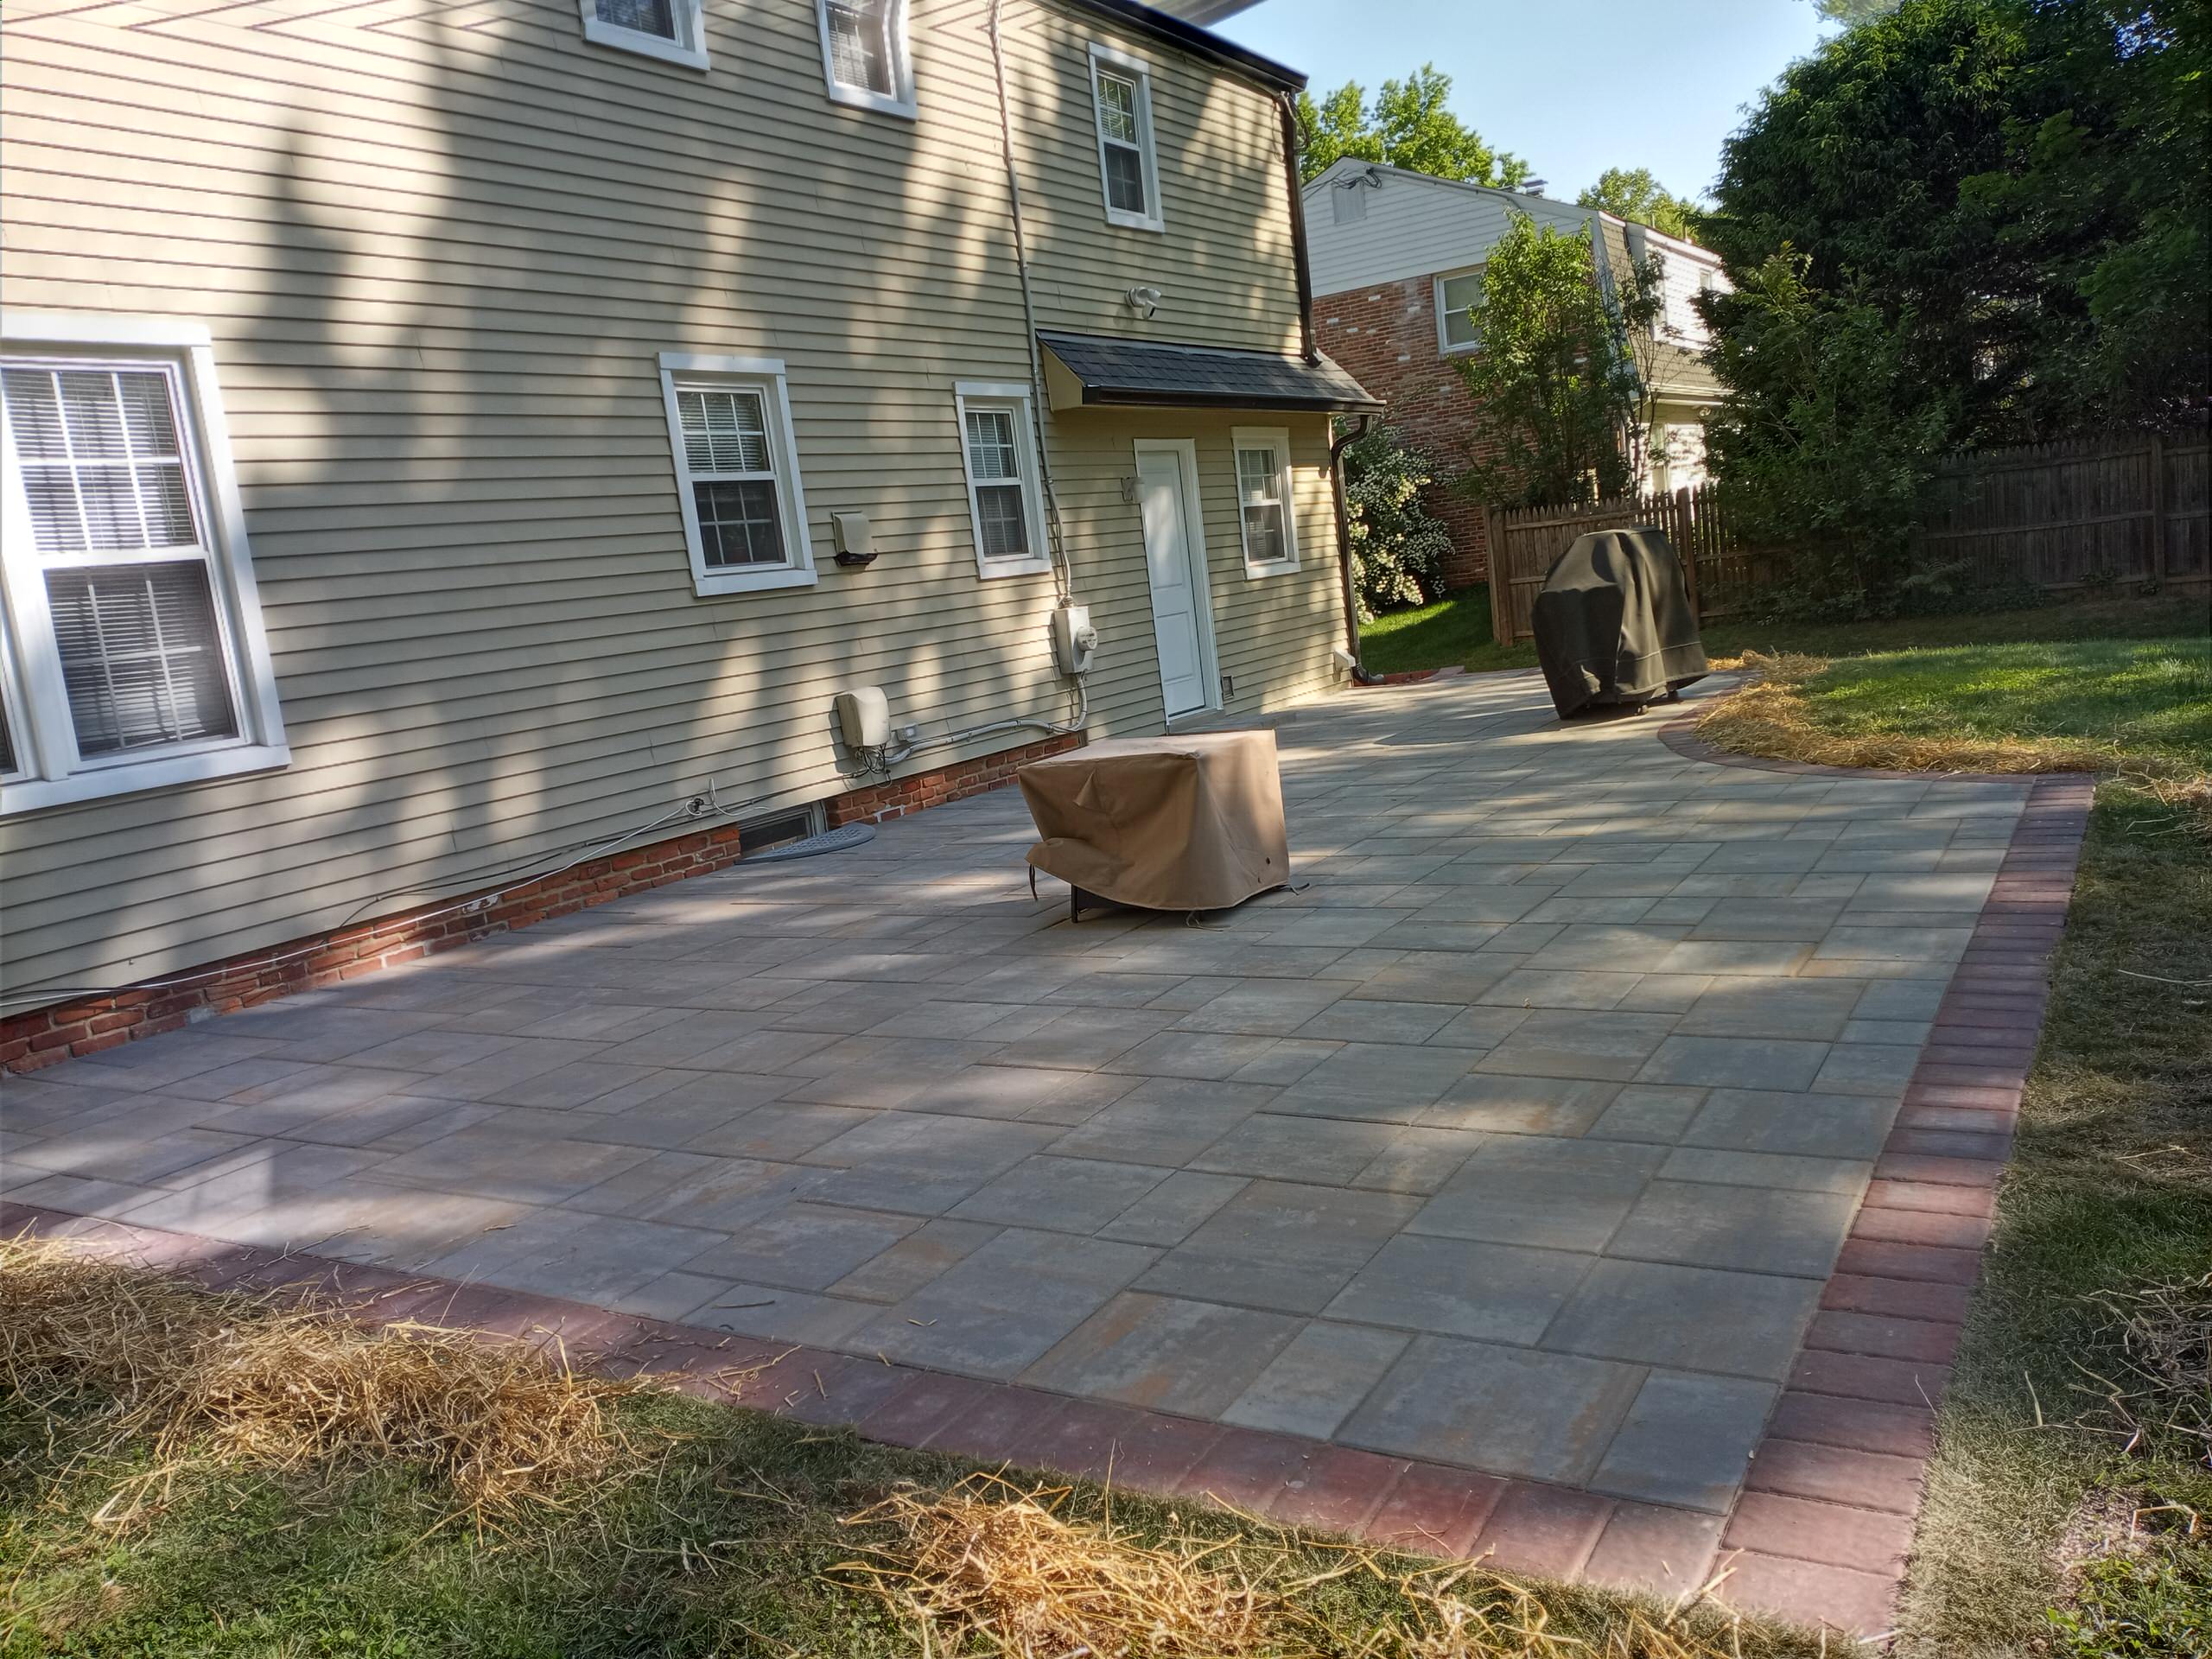 This project involves replacing the existing brick patio with a new Paver Westchester Blend [color ] XL  and with a nice border Autumn Blend [color] that refreshes the design of the patio...